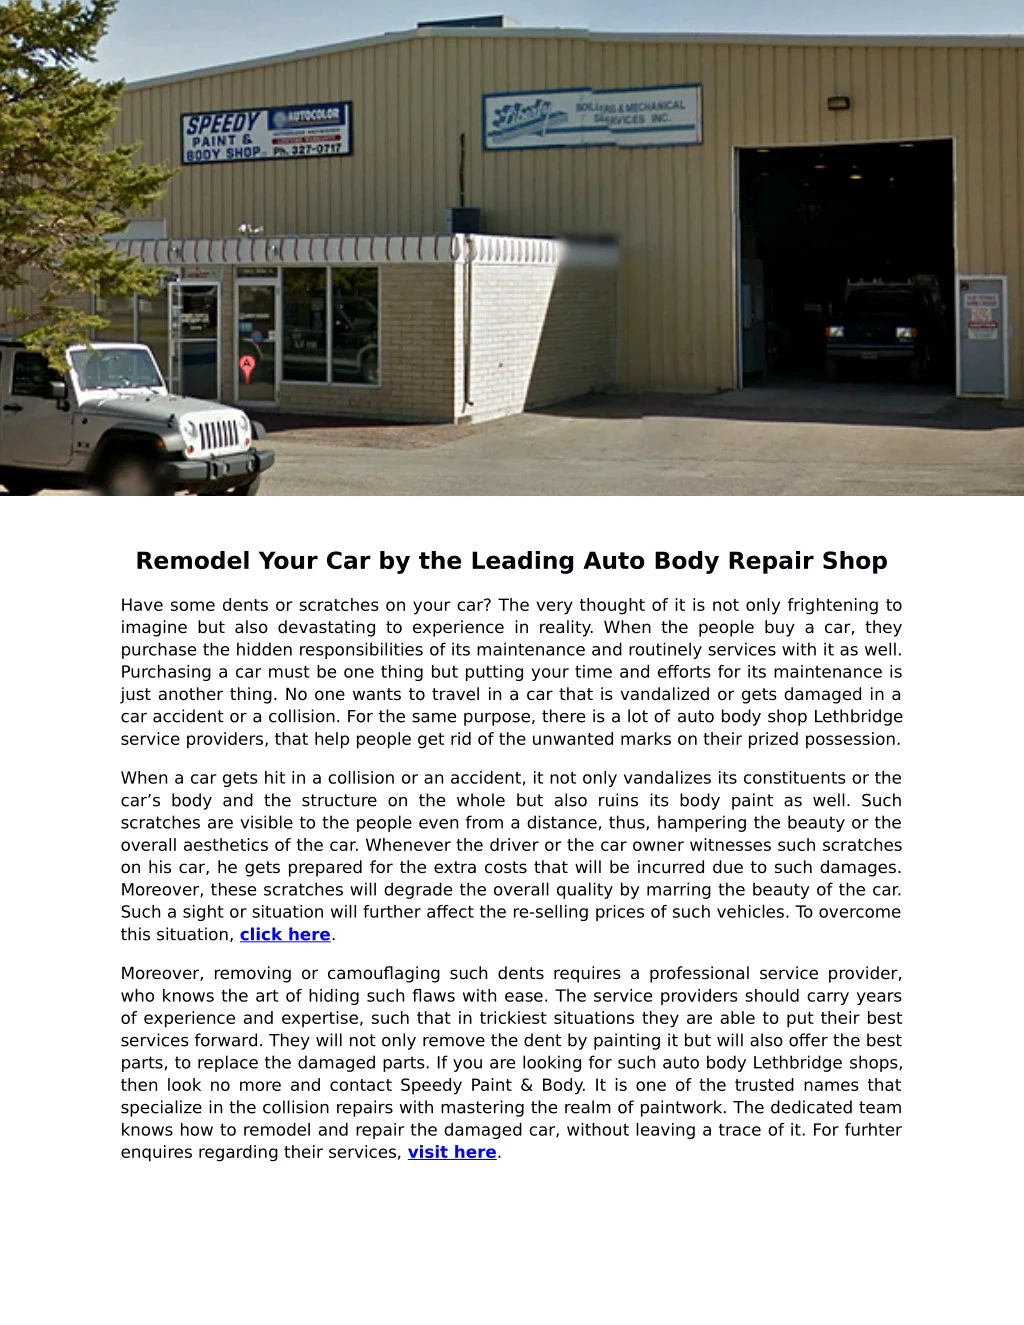 remodel your car by the leading auto body repair